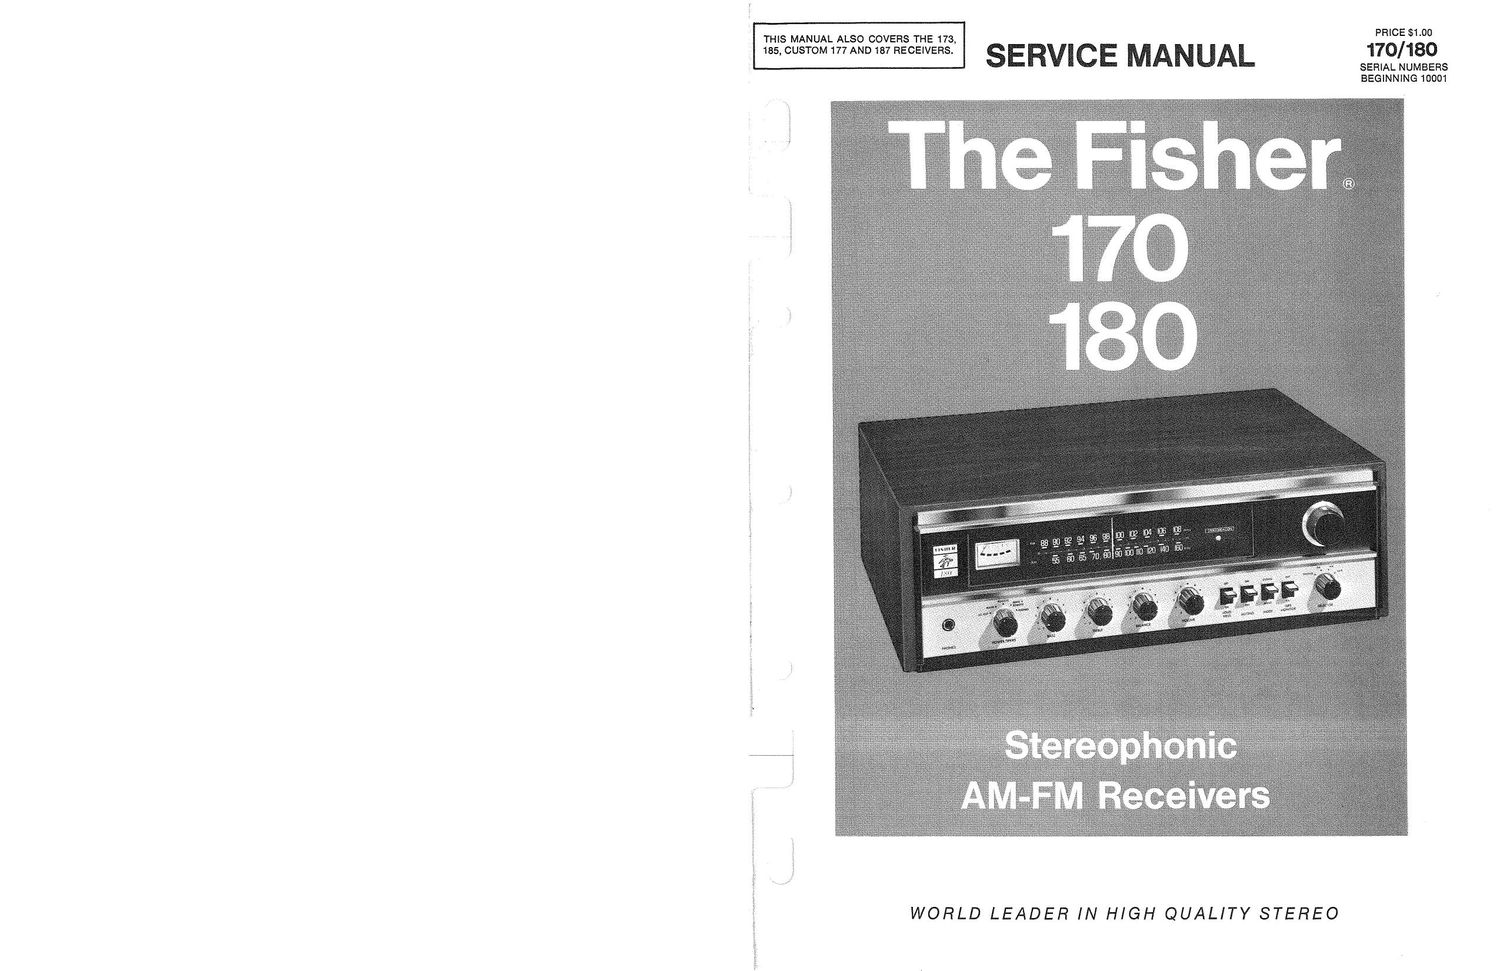 Fisher 170 Service Manual